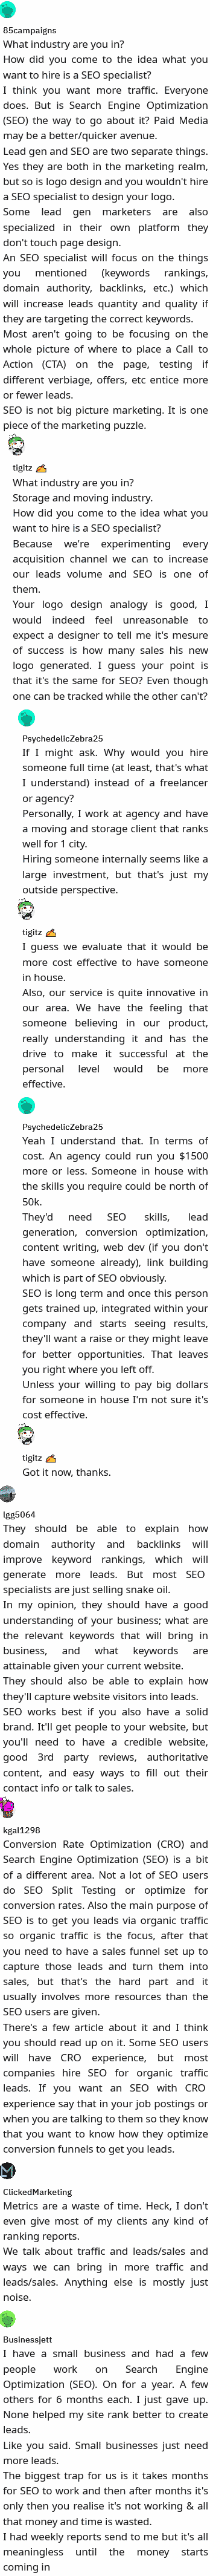 my business is looking for an seo specialist and i am getting tasked to interview them